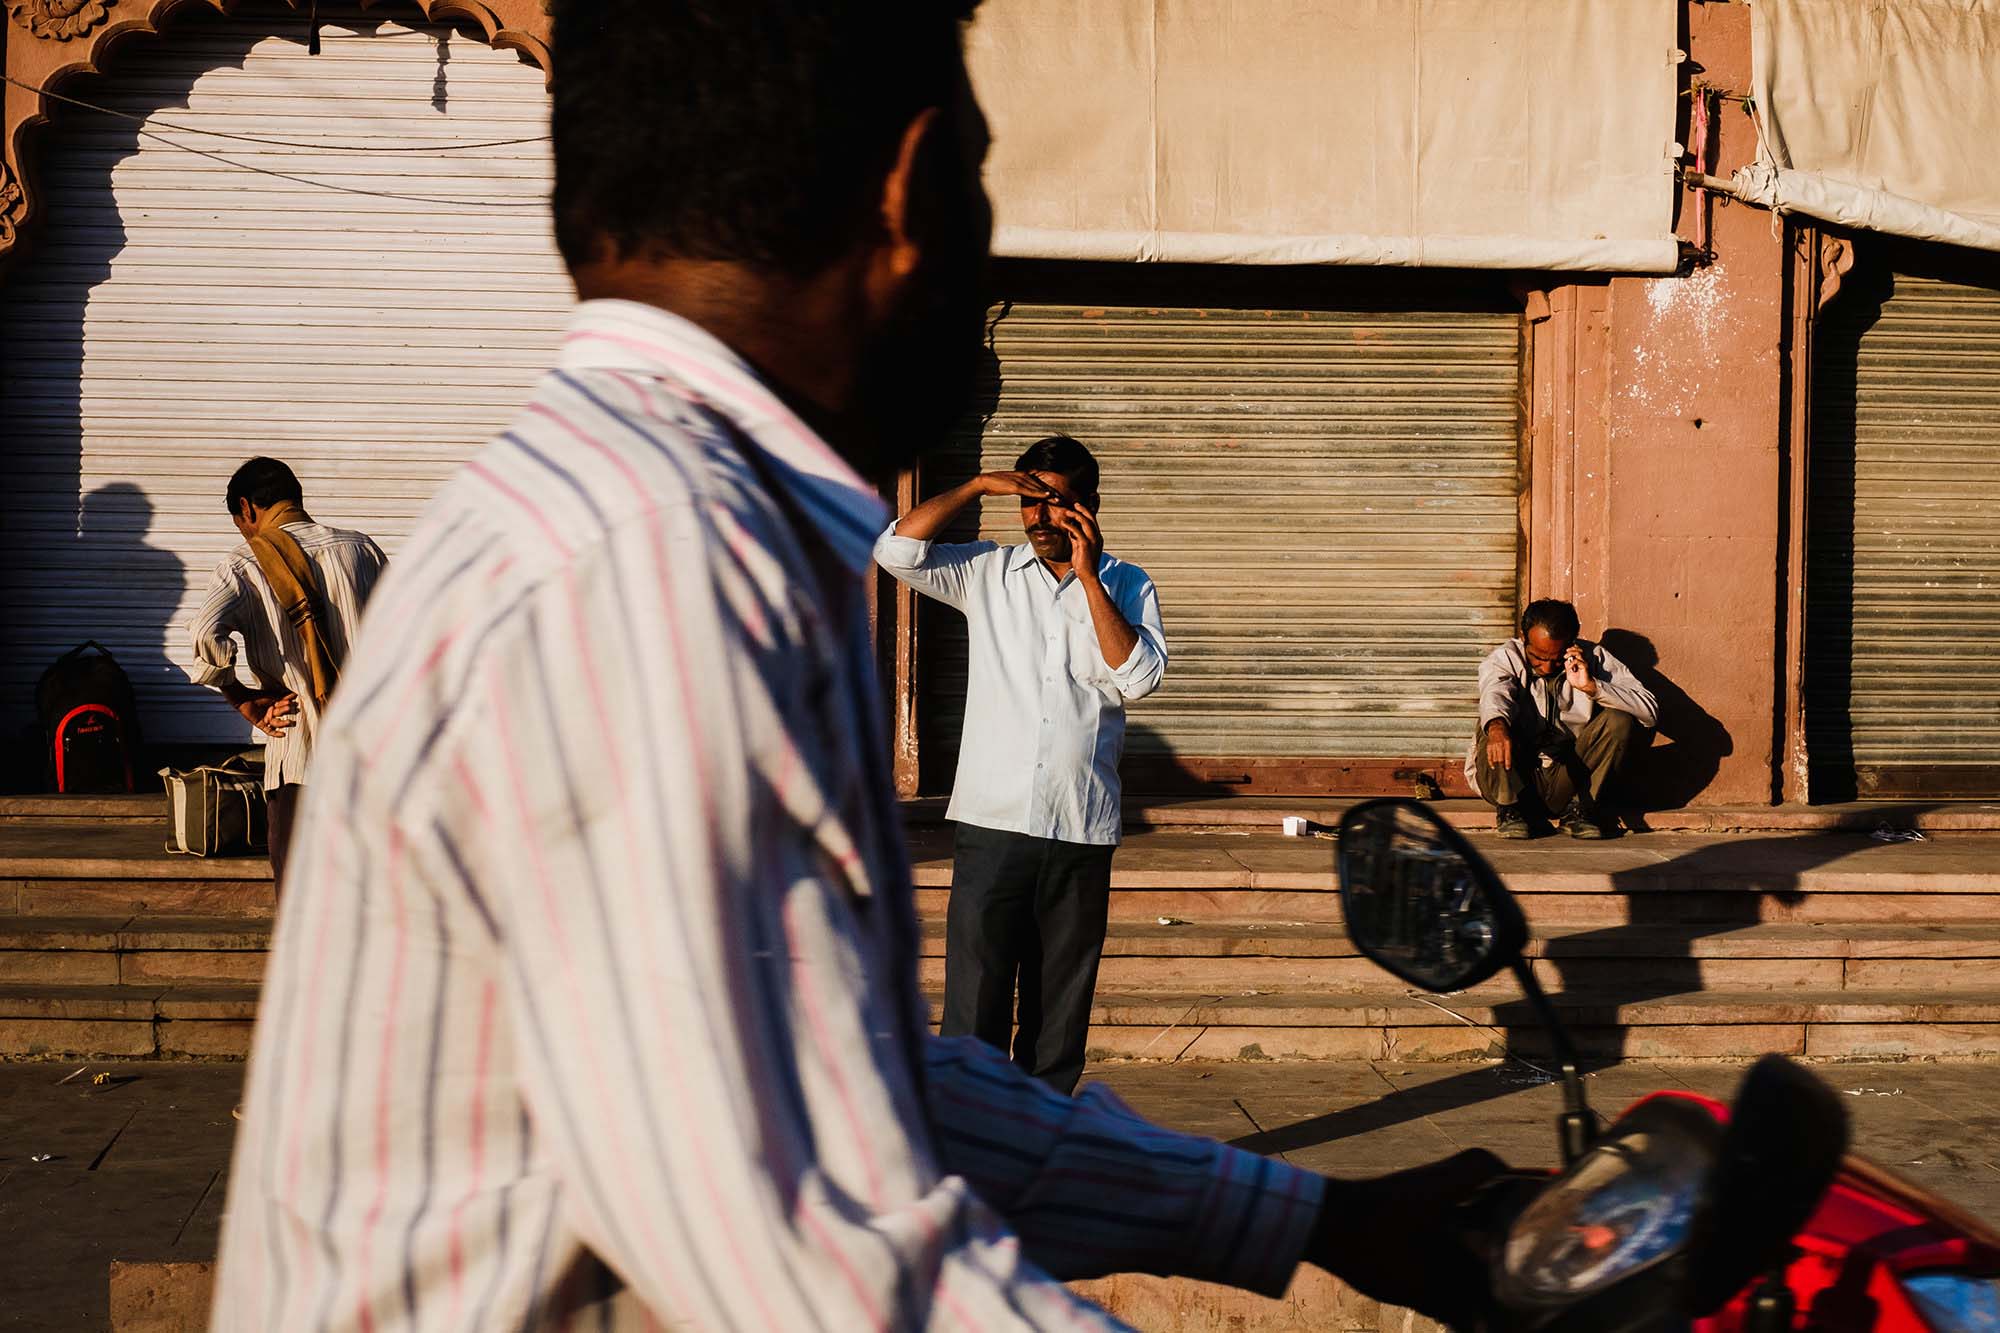 Street photography in India